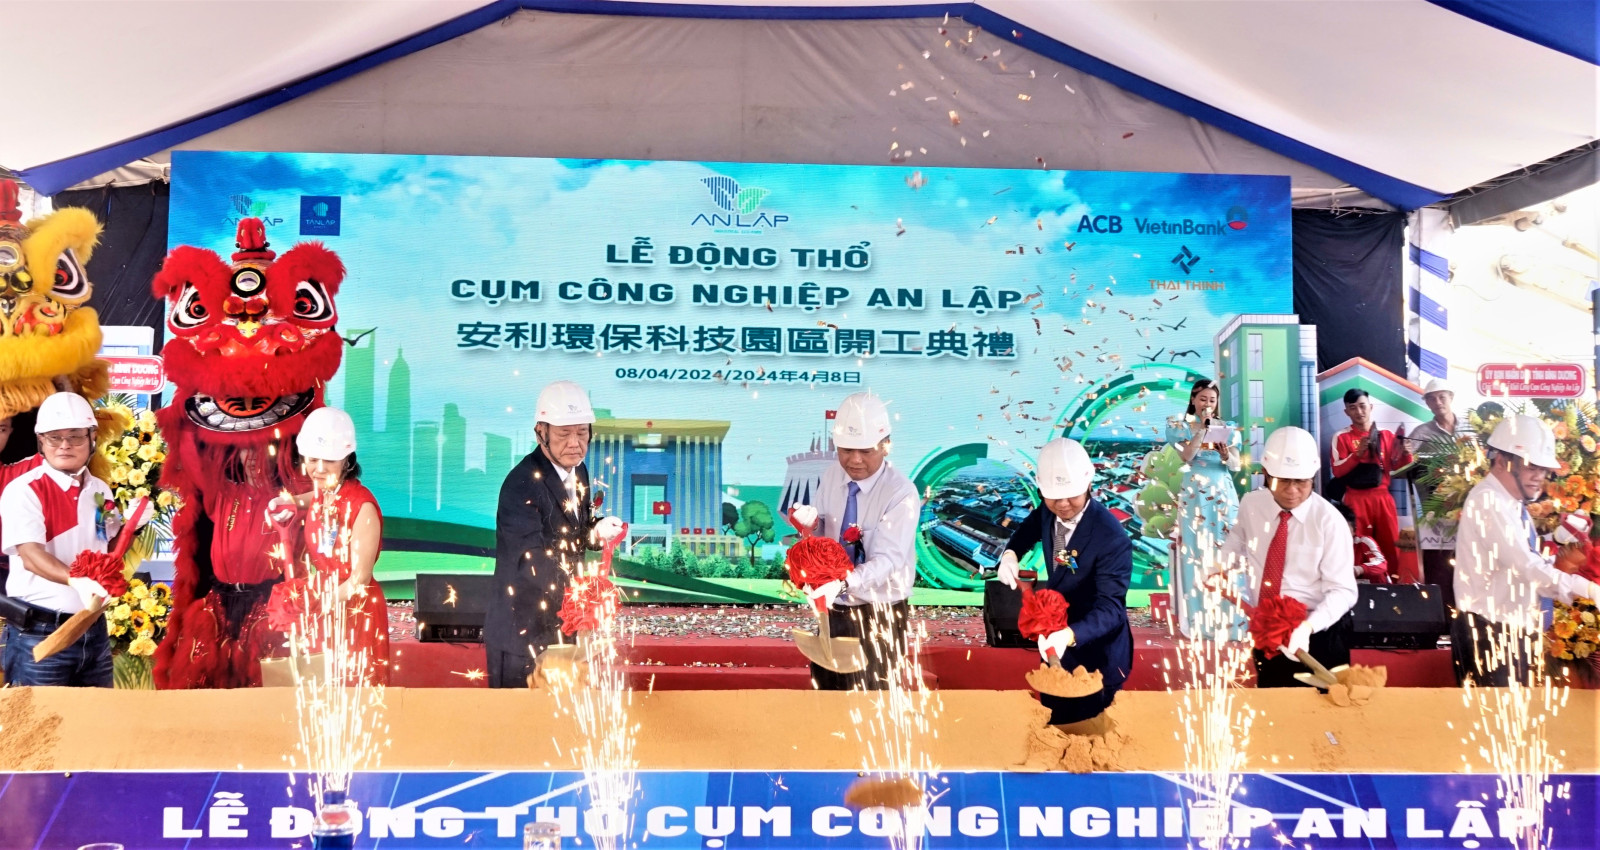 Binh Duong started construction on the 8th industrial cluster in Dau T...